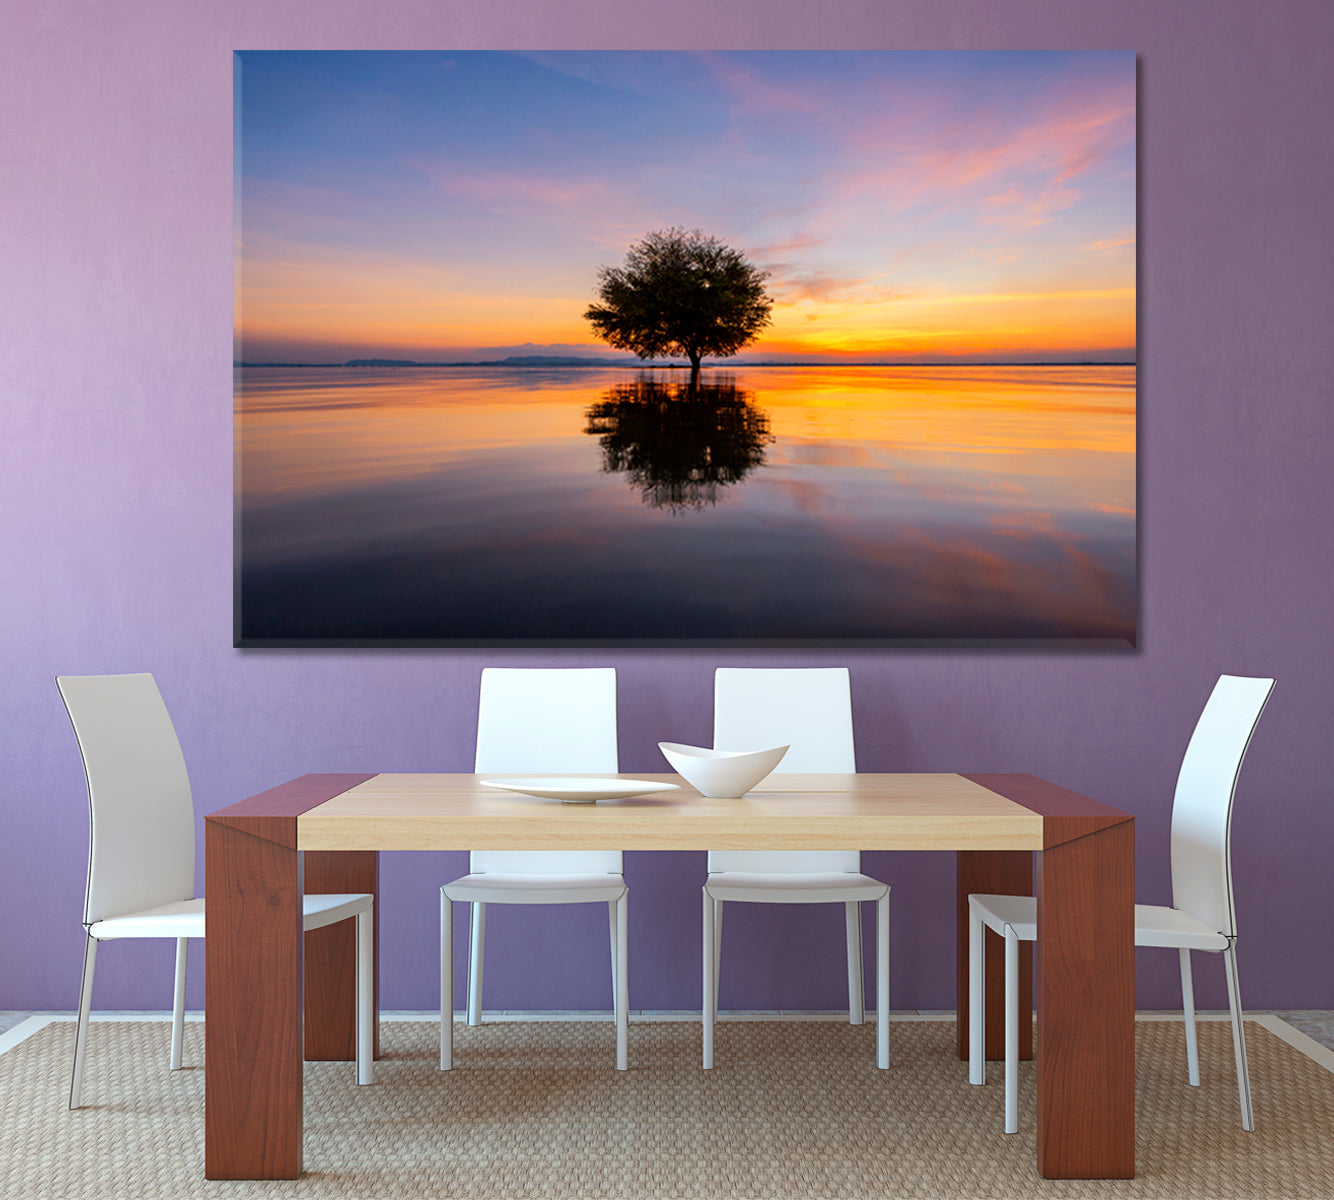 Breathtaking Landscape Inspired by Nature Sunset Over Water Flooded Trees Scenery Landscape Fine Art Print Artesty   